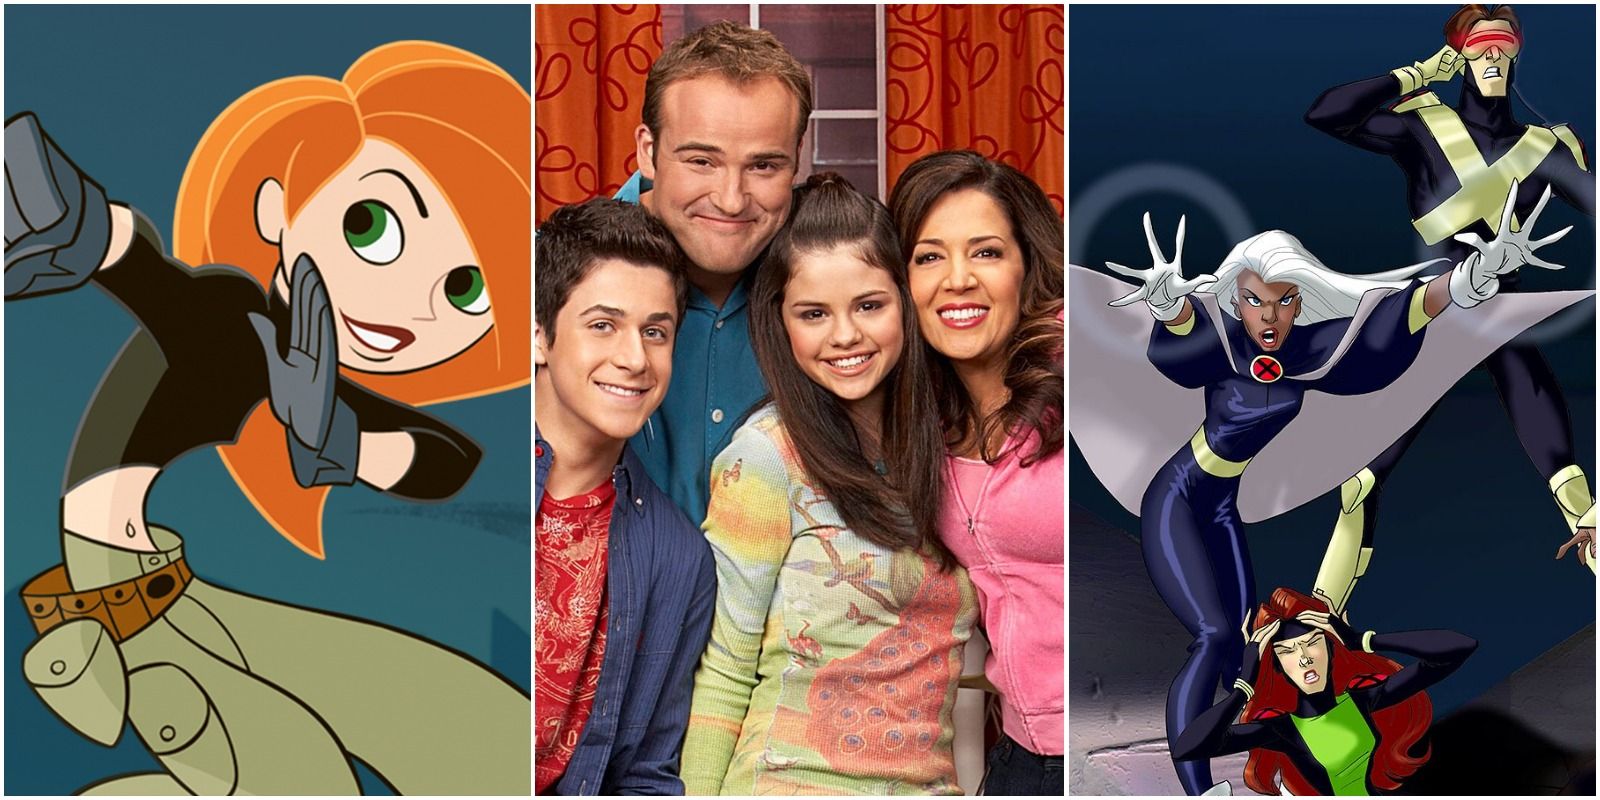 Top 10 TV Shows From The 2000s On Disney+ To Watch, According To IMDb